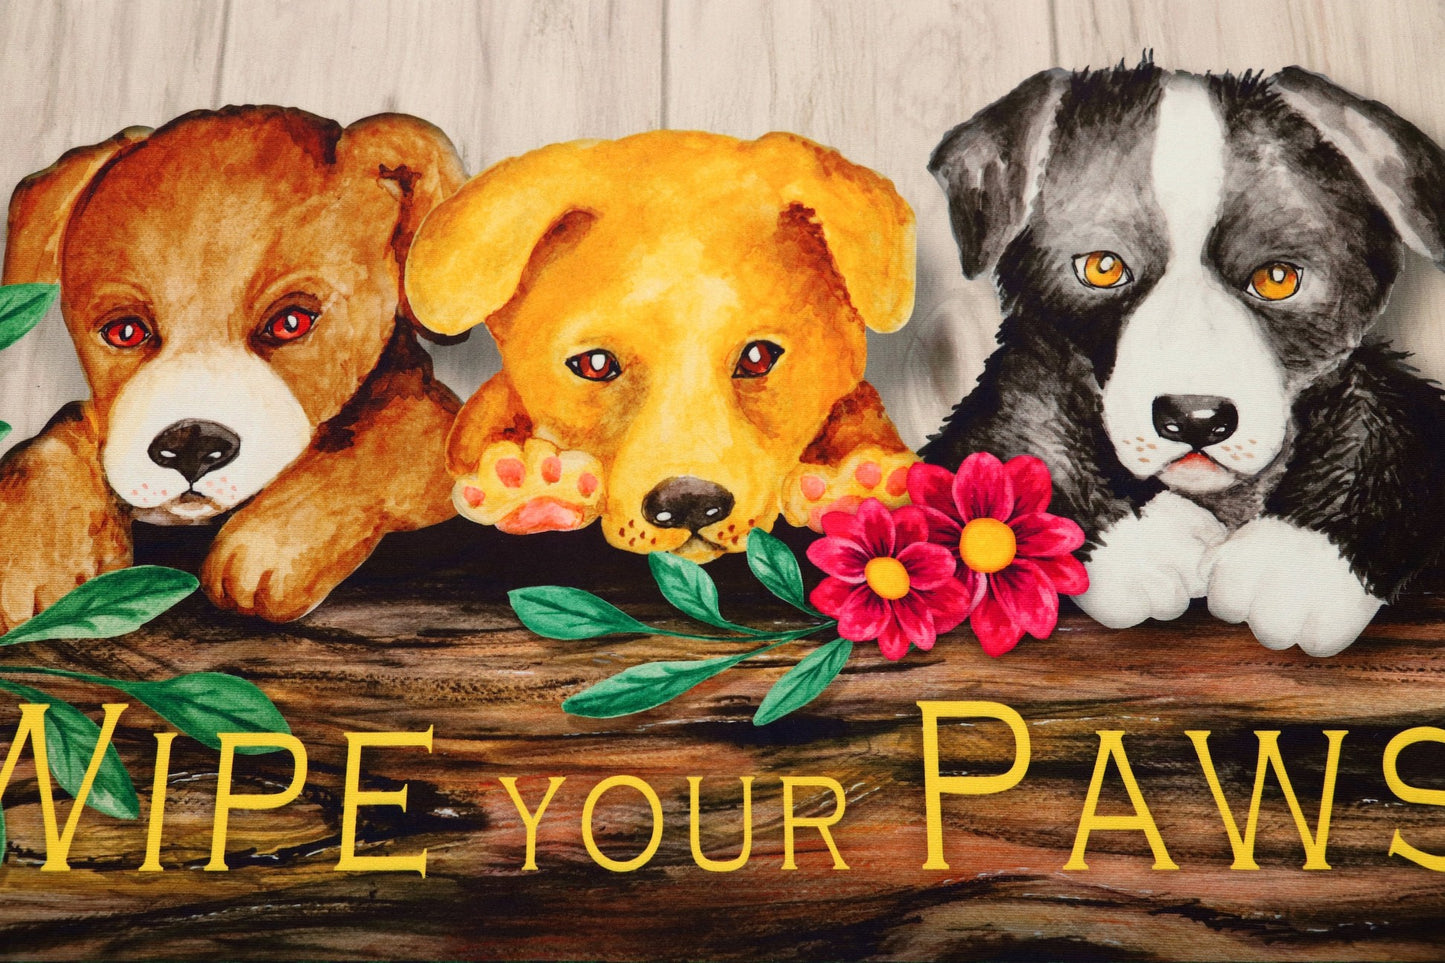 Wipe Your Paws Olivia's Home Accent Washable Rug 22" x 32"